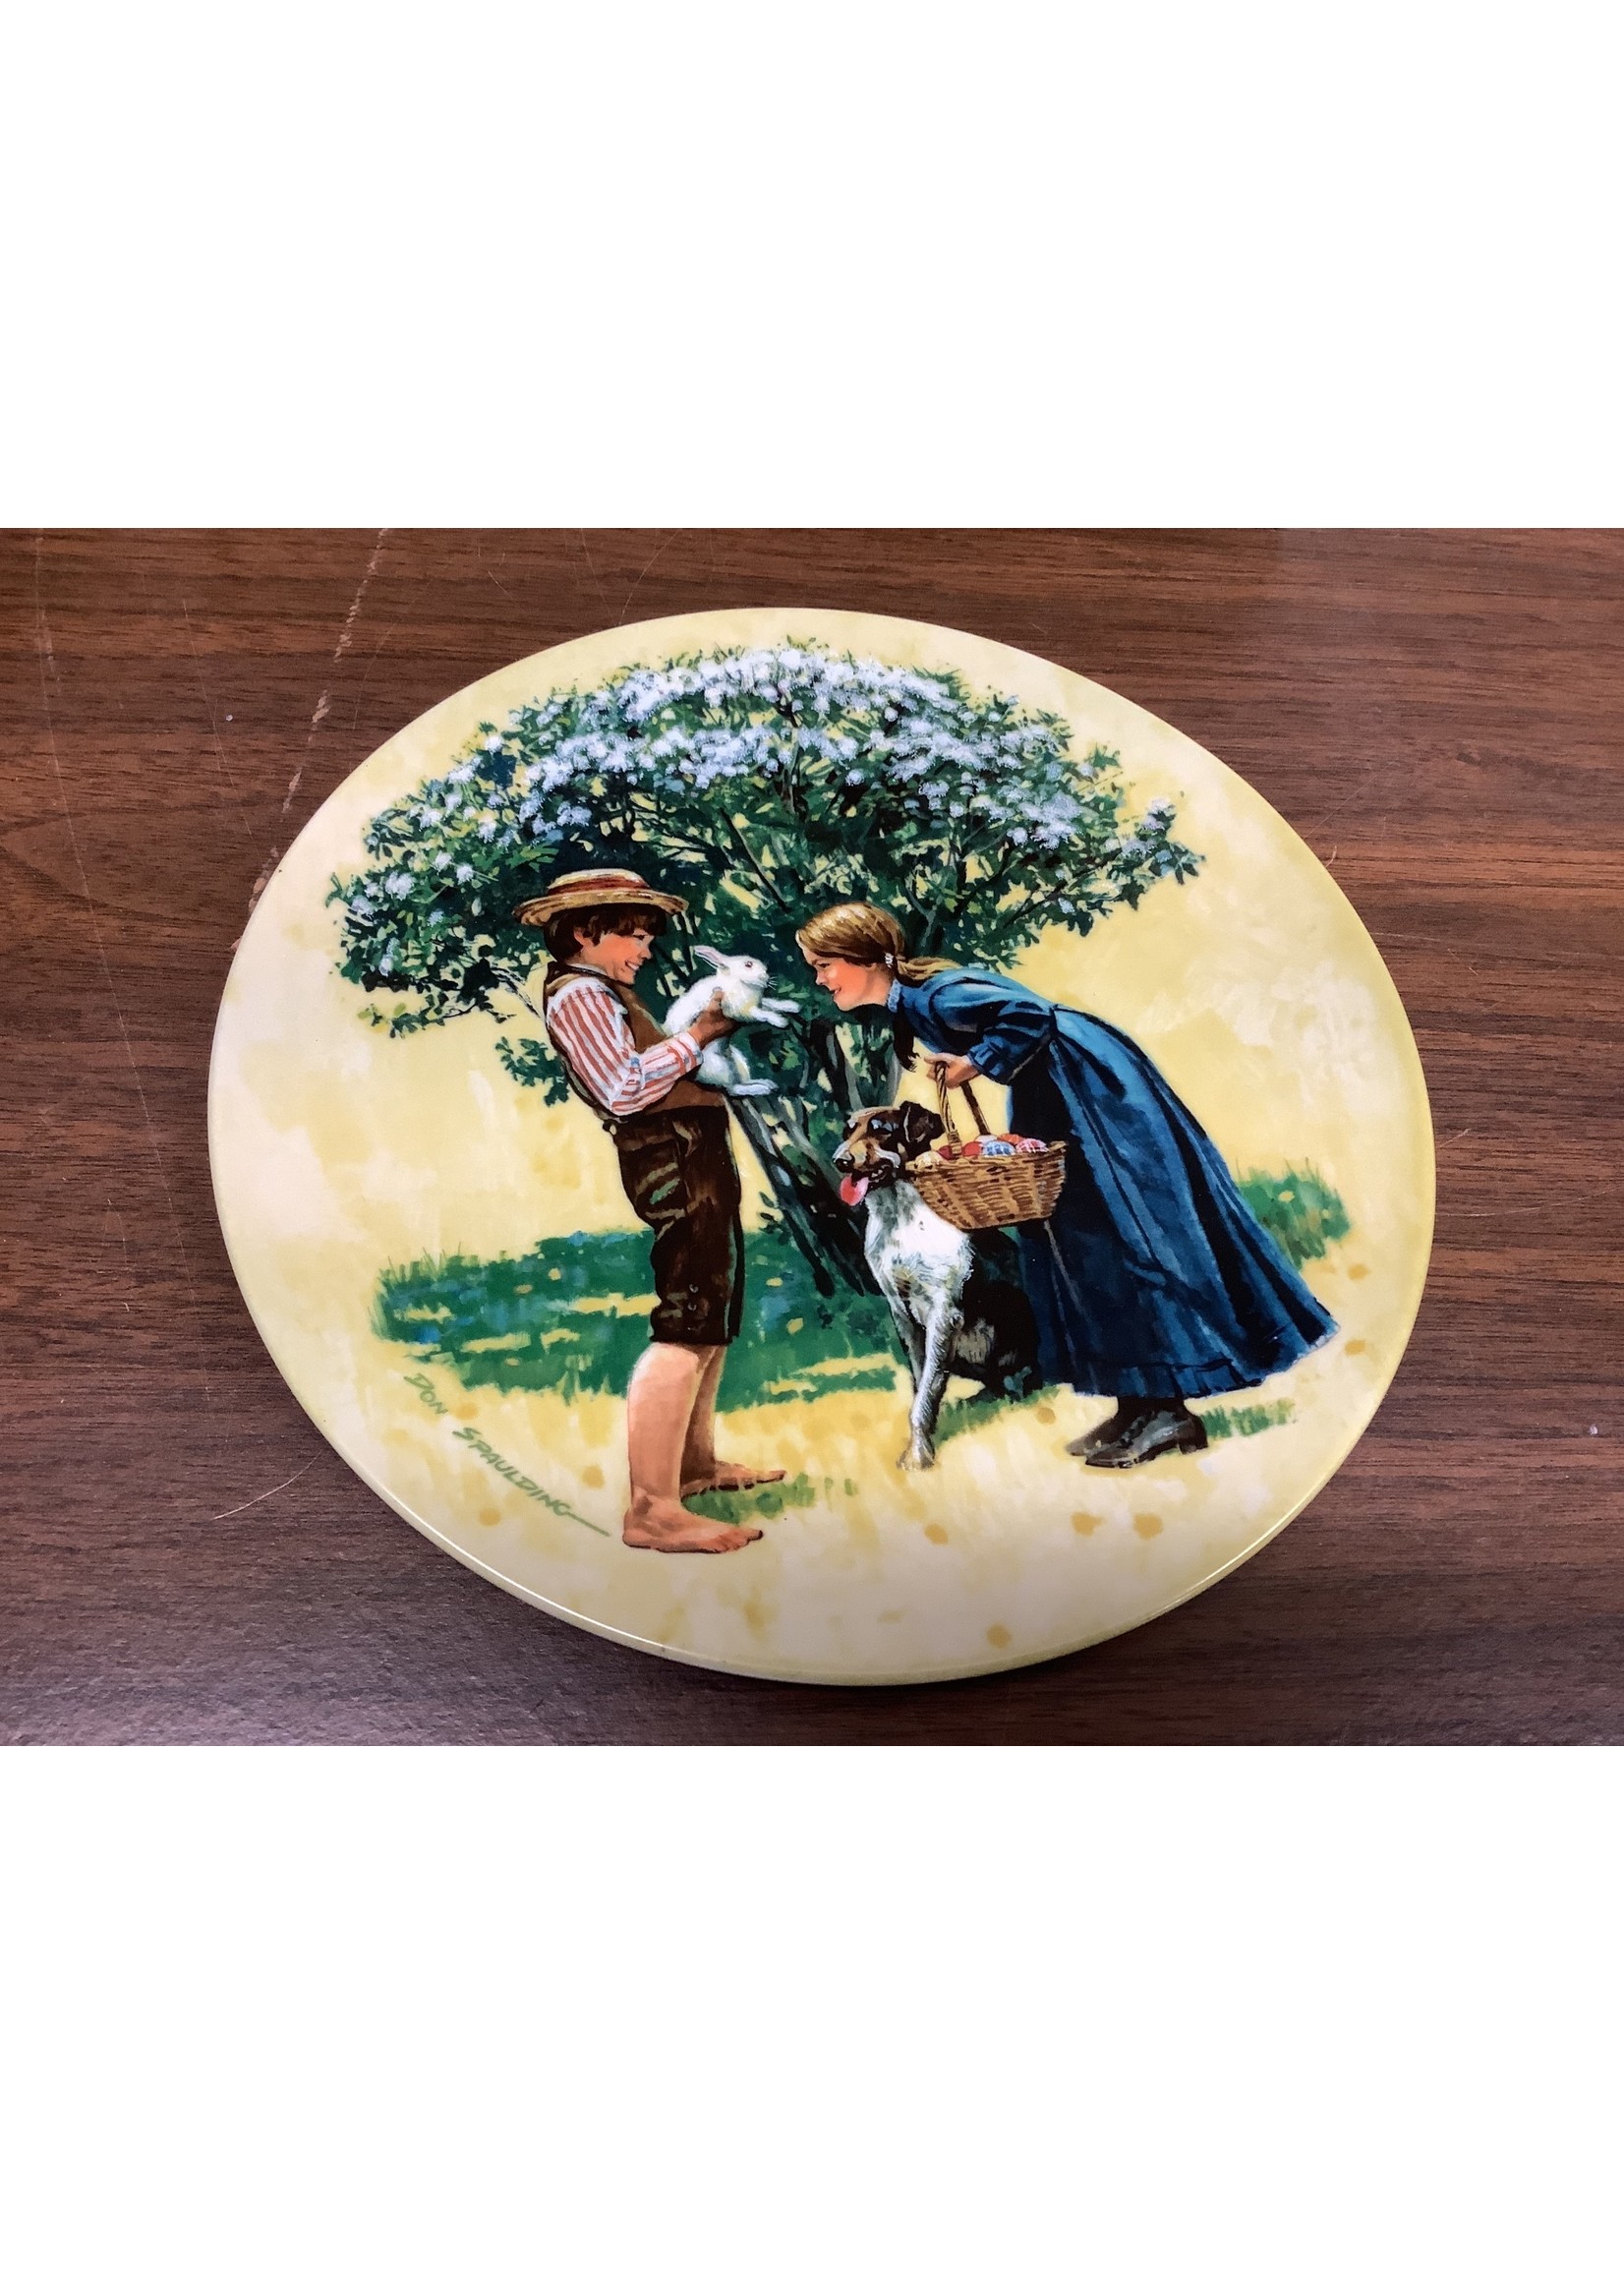 The Bradford Exchange Collectors Plate (1980) “Easter” Bradex-Nr. 84-41-2.3